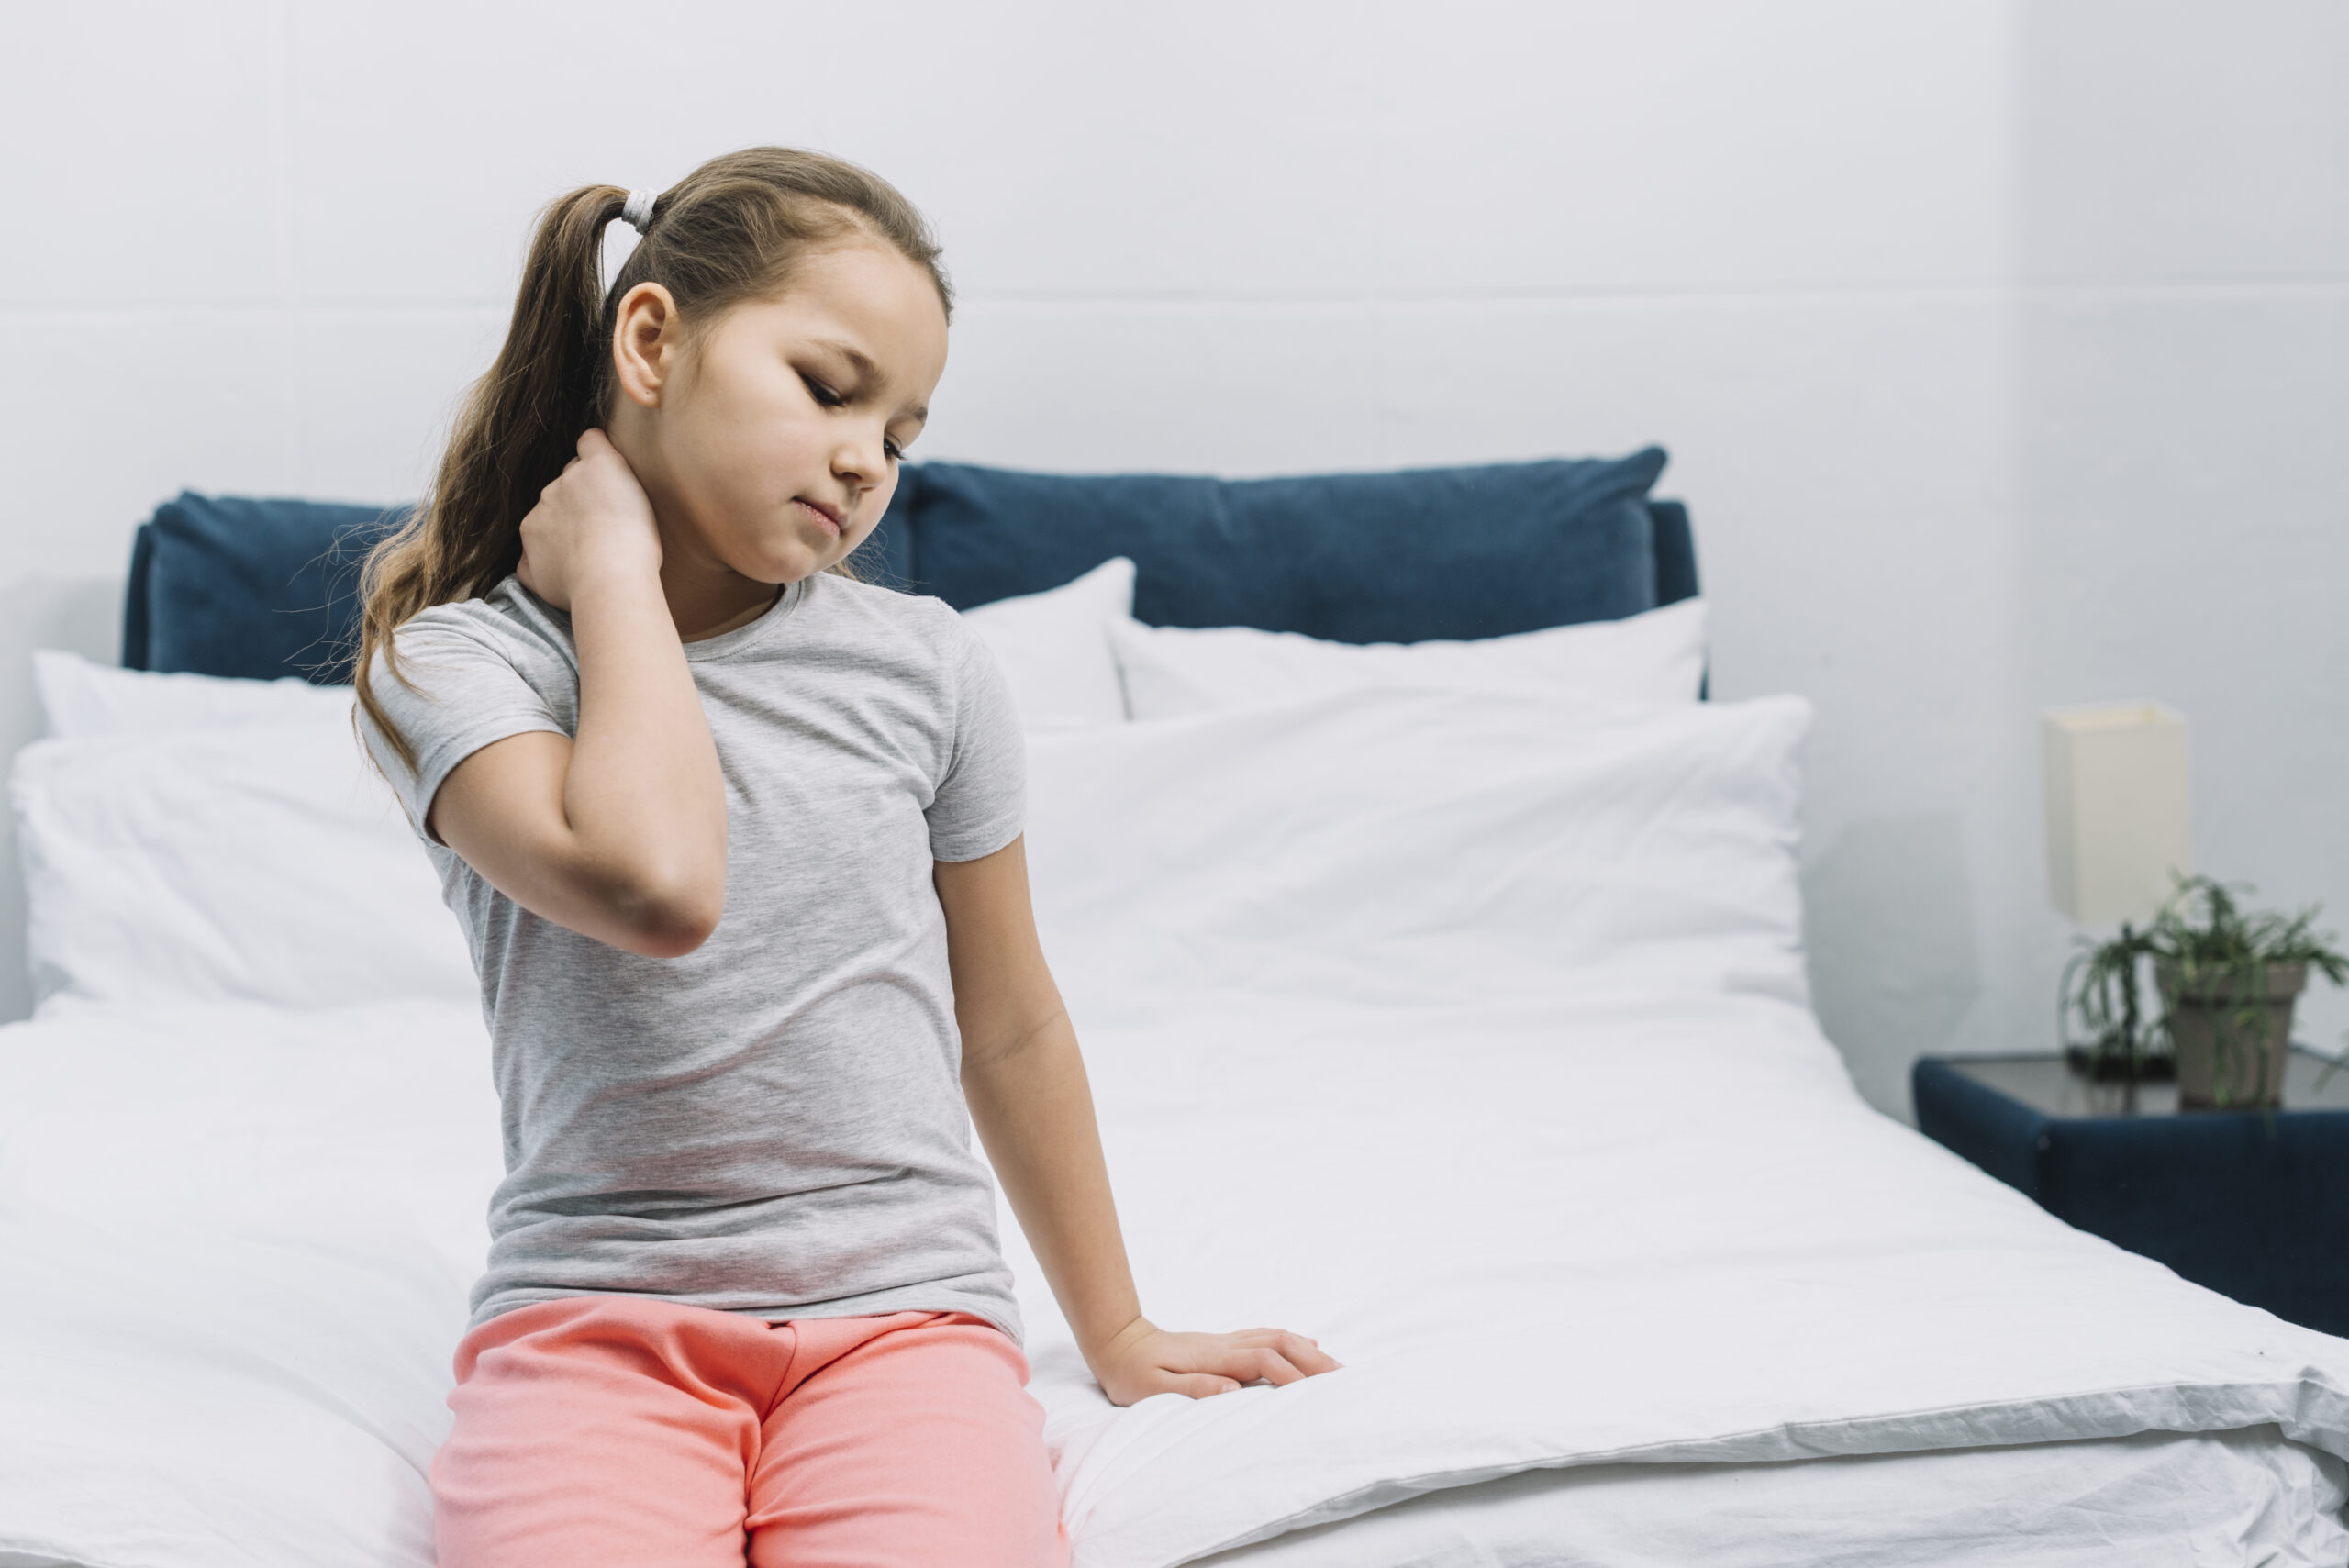 Neck Pain in Children: What Are the Usual Causes?